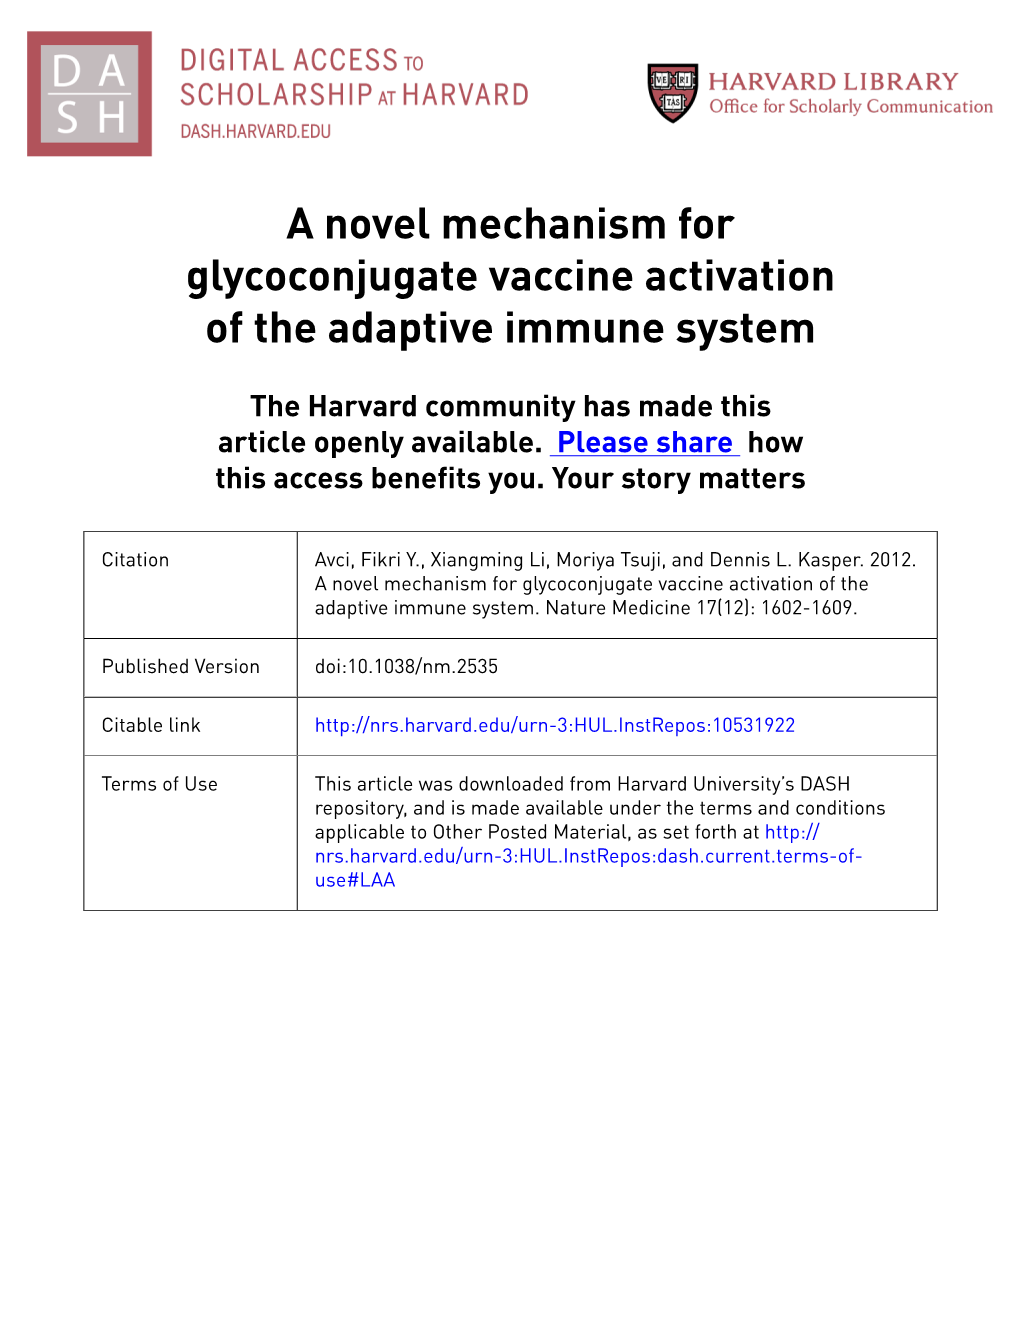 A Novel Mechanism for Glycoconjugate Vaccine Activation of the Adaptive Immune System